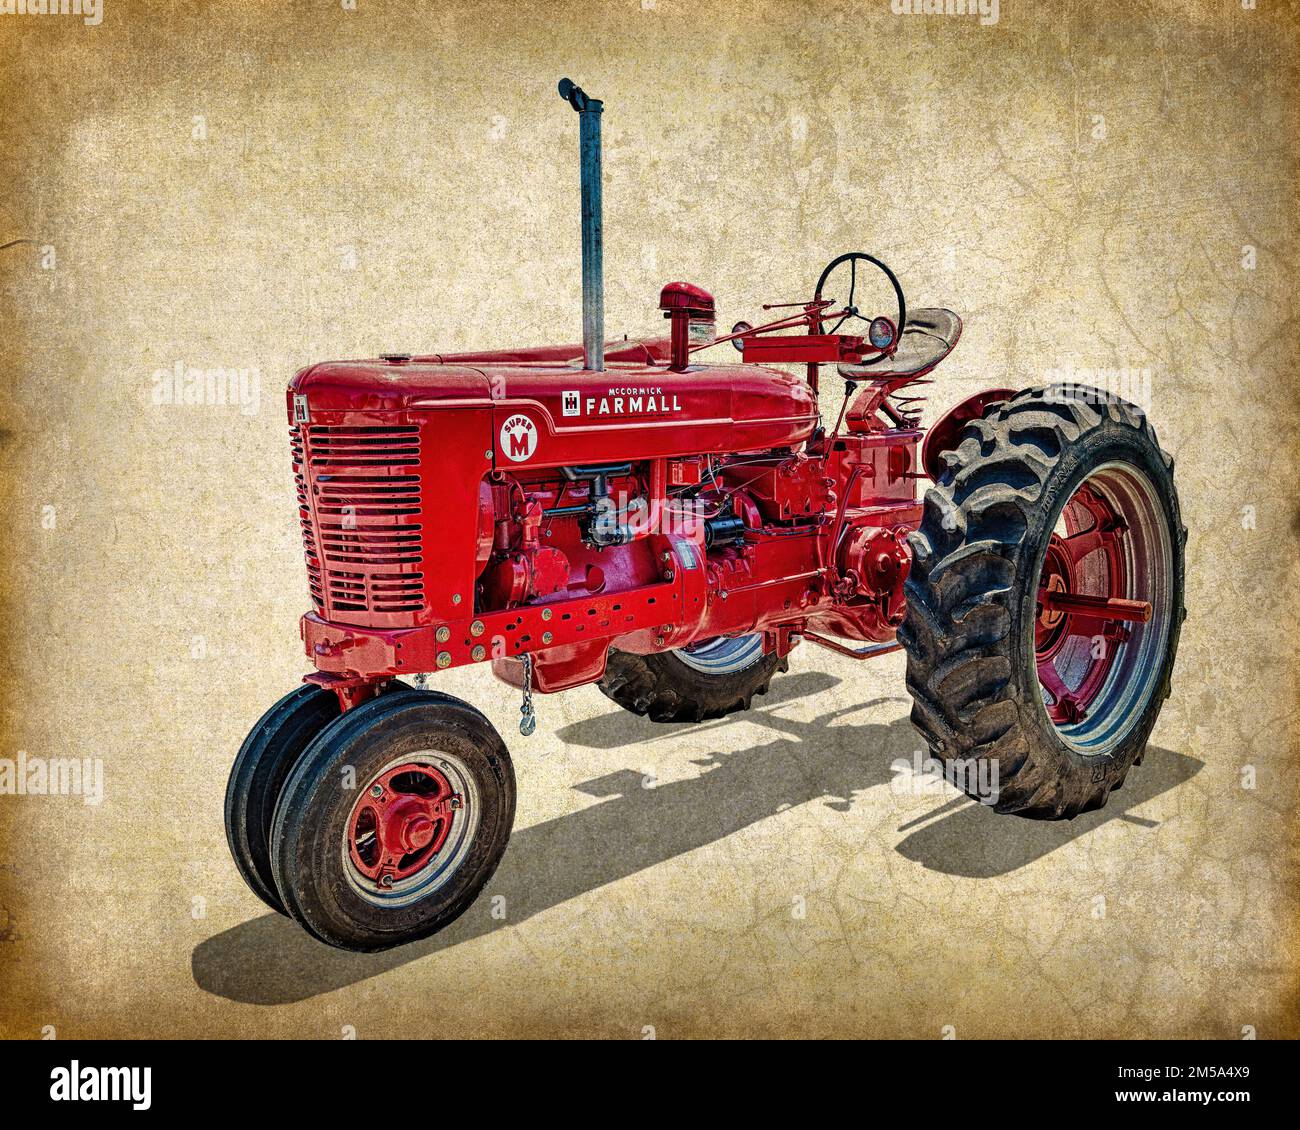 A 1950s era McCormick International Harvester Farmall Model Super M red tractor in a mixed-media photograph overlaid on a textured antique background. Stock Photo